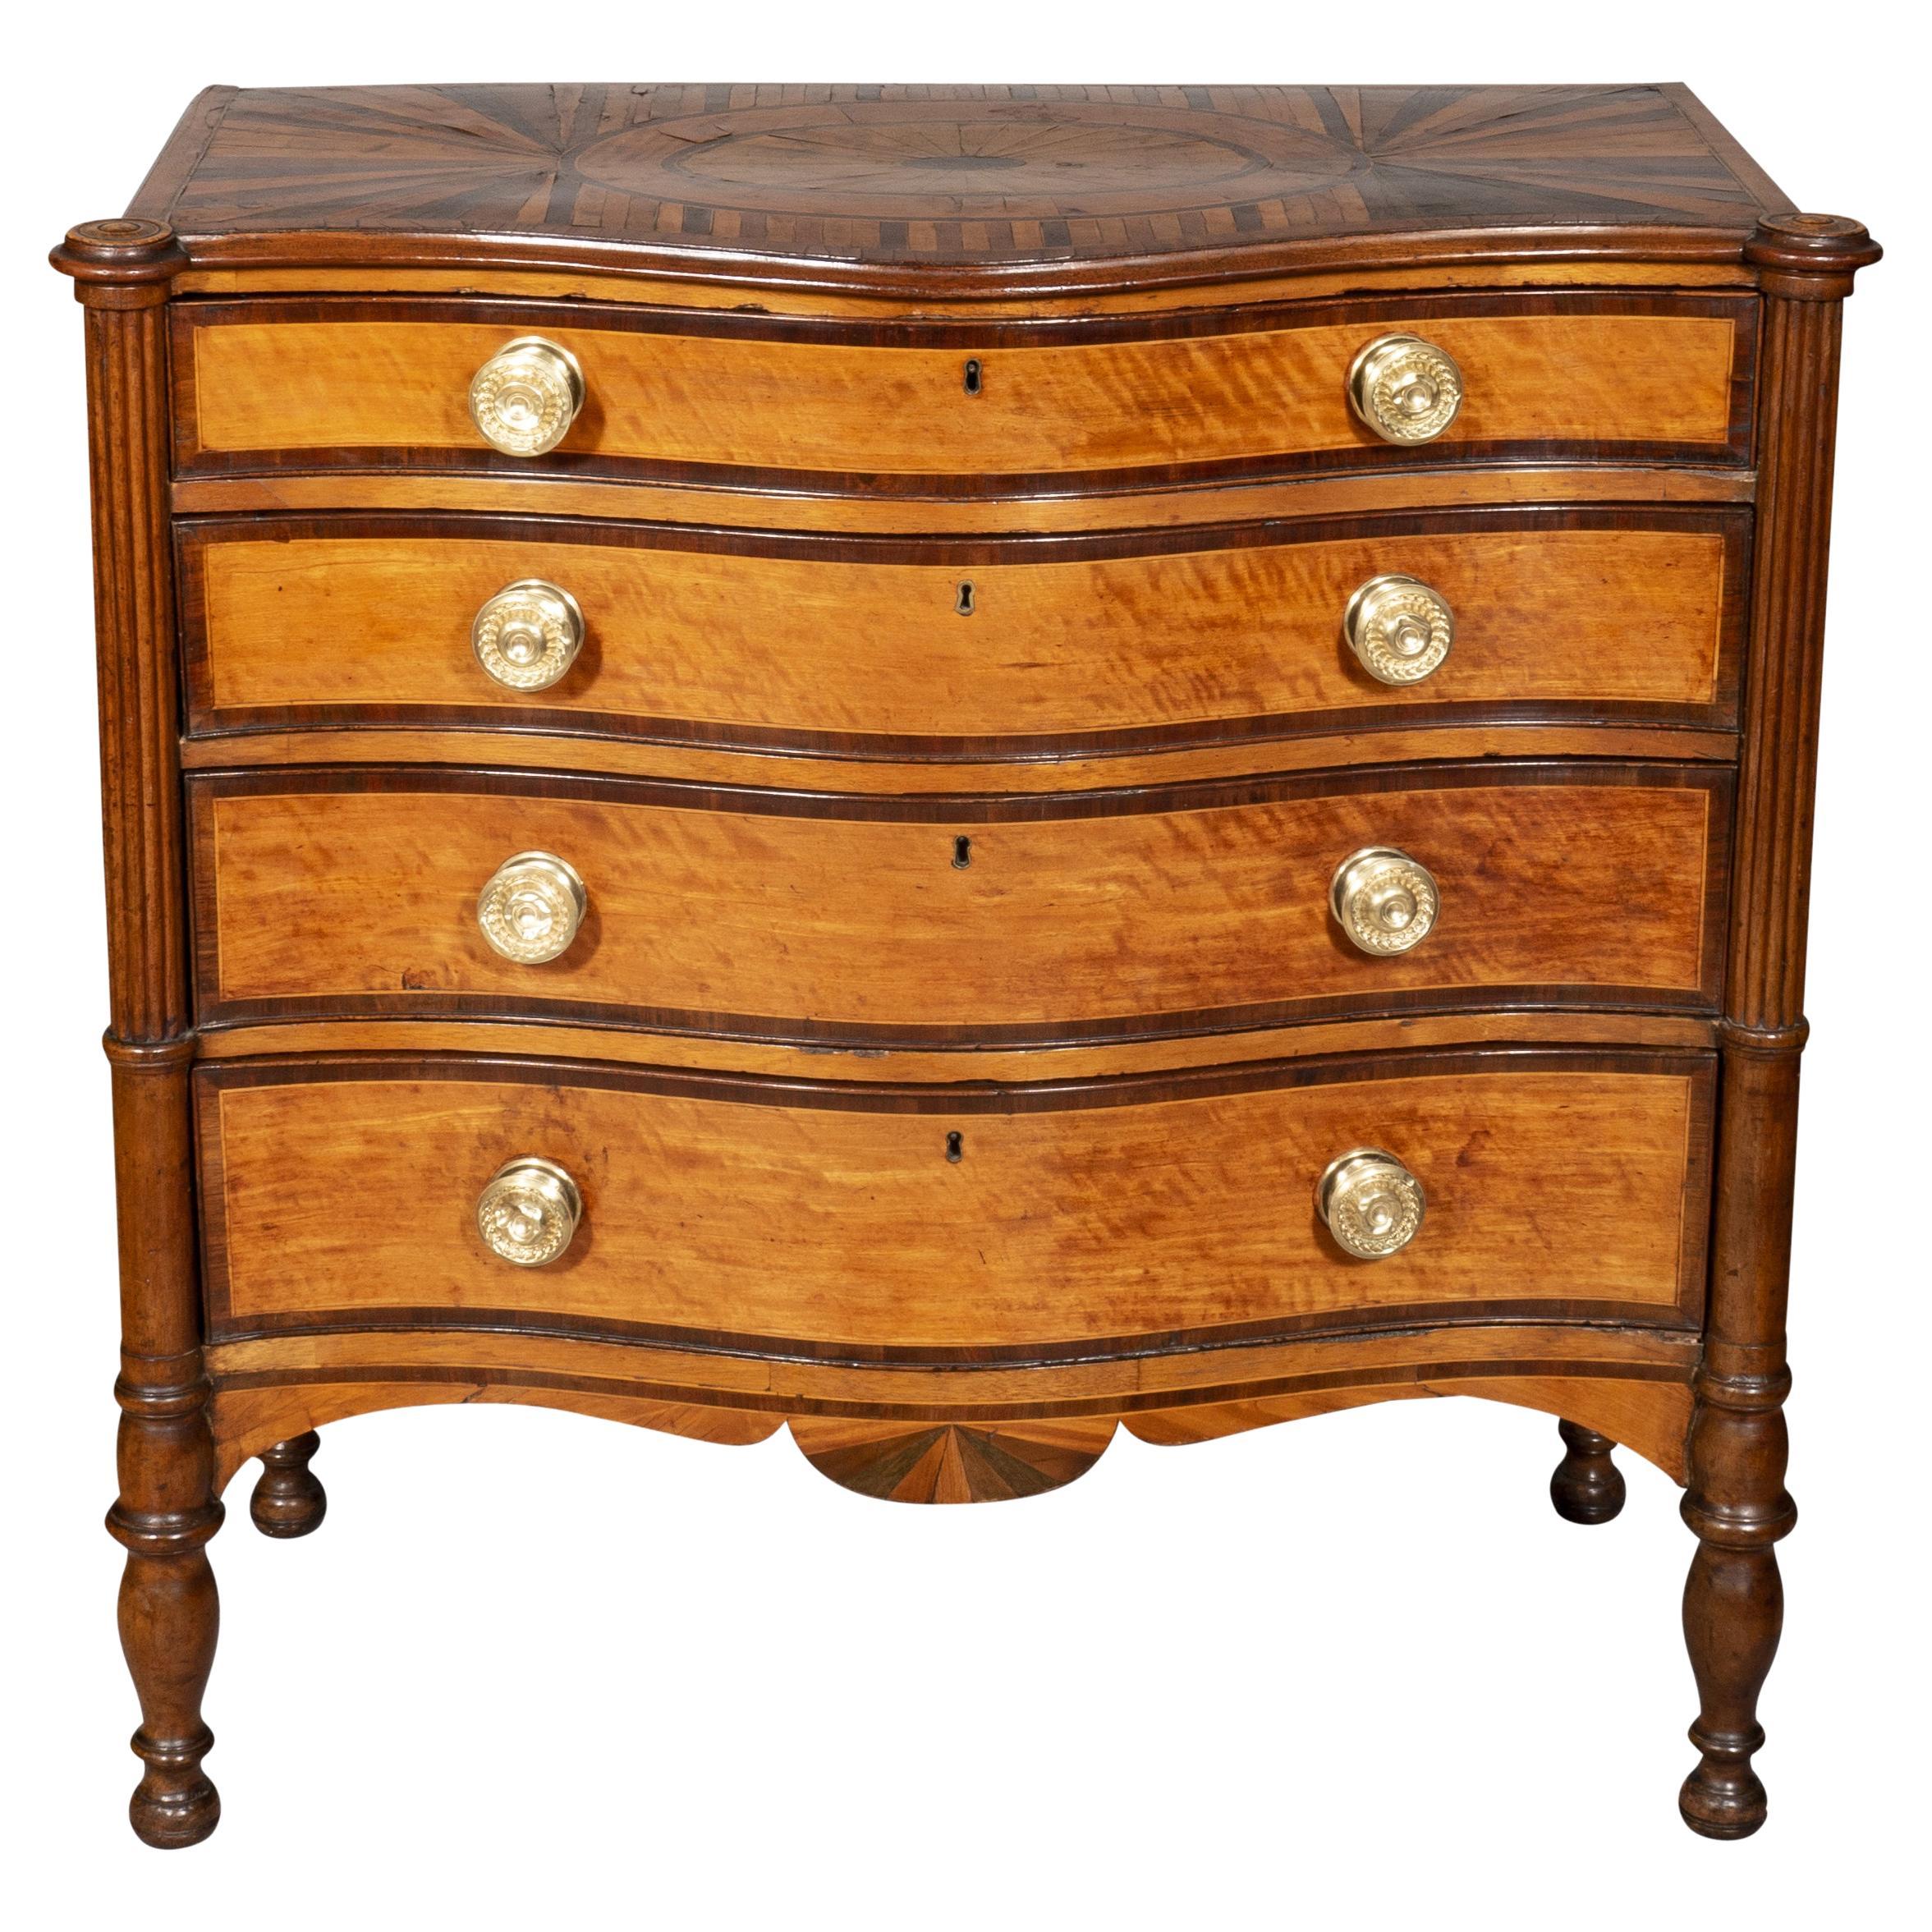 With a serpentine rectangular top with rounded cookie corners, elaborate sunburst inlays of exotic woods surrounding an oval paterae panel with punch work decoration. Over a fitted gentlemen's dressing drawer over three graduated drawers, all